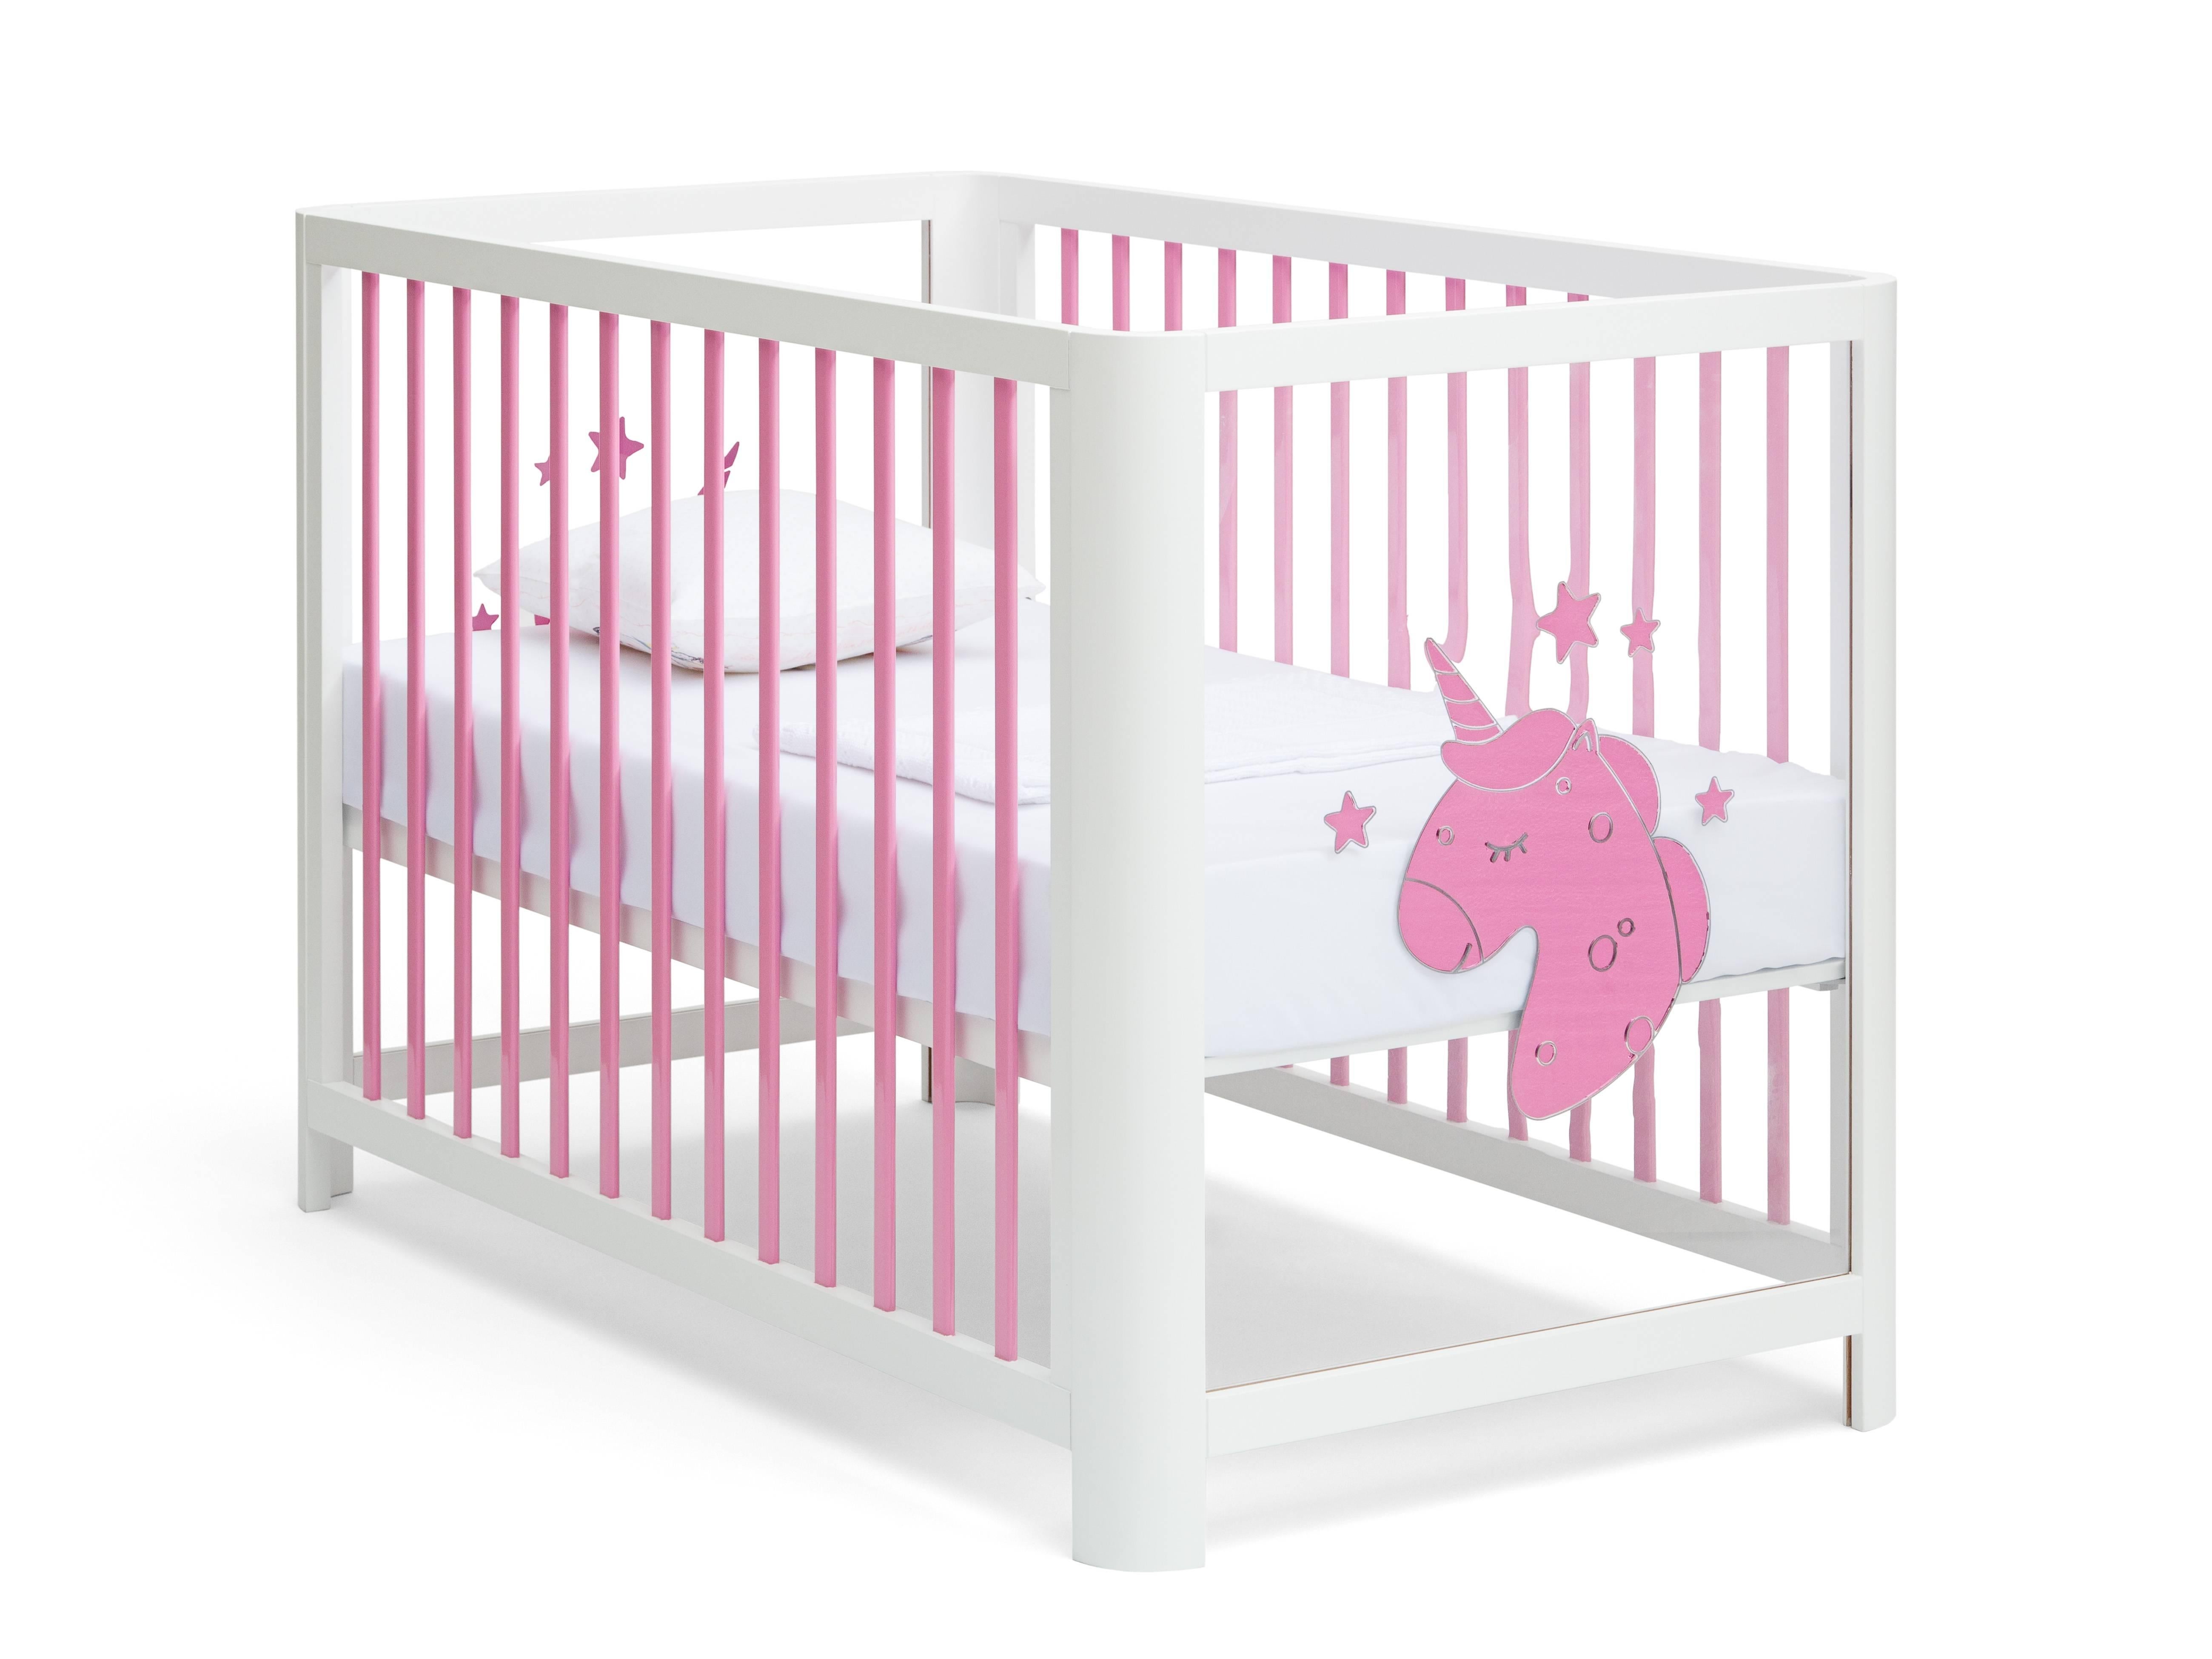 Flying in a cloud, dreaming of air and purity and fun flying on the wings of a majestic myth, a unicorn of pink mirror acrylic and clear skies ahead forecast good times in store for baby. Built to last, built by hand. Converts 5 ways as baby grows,